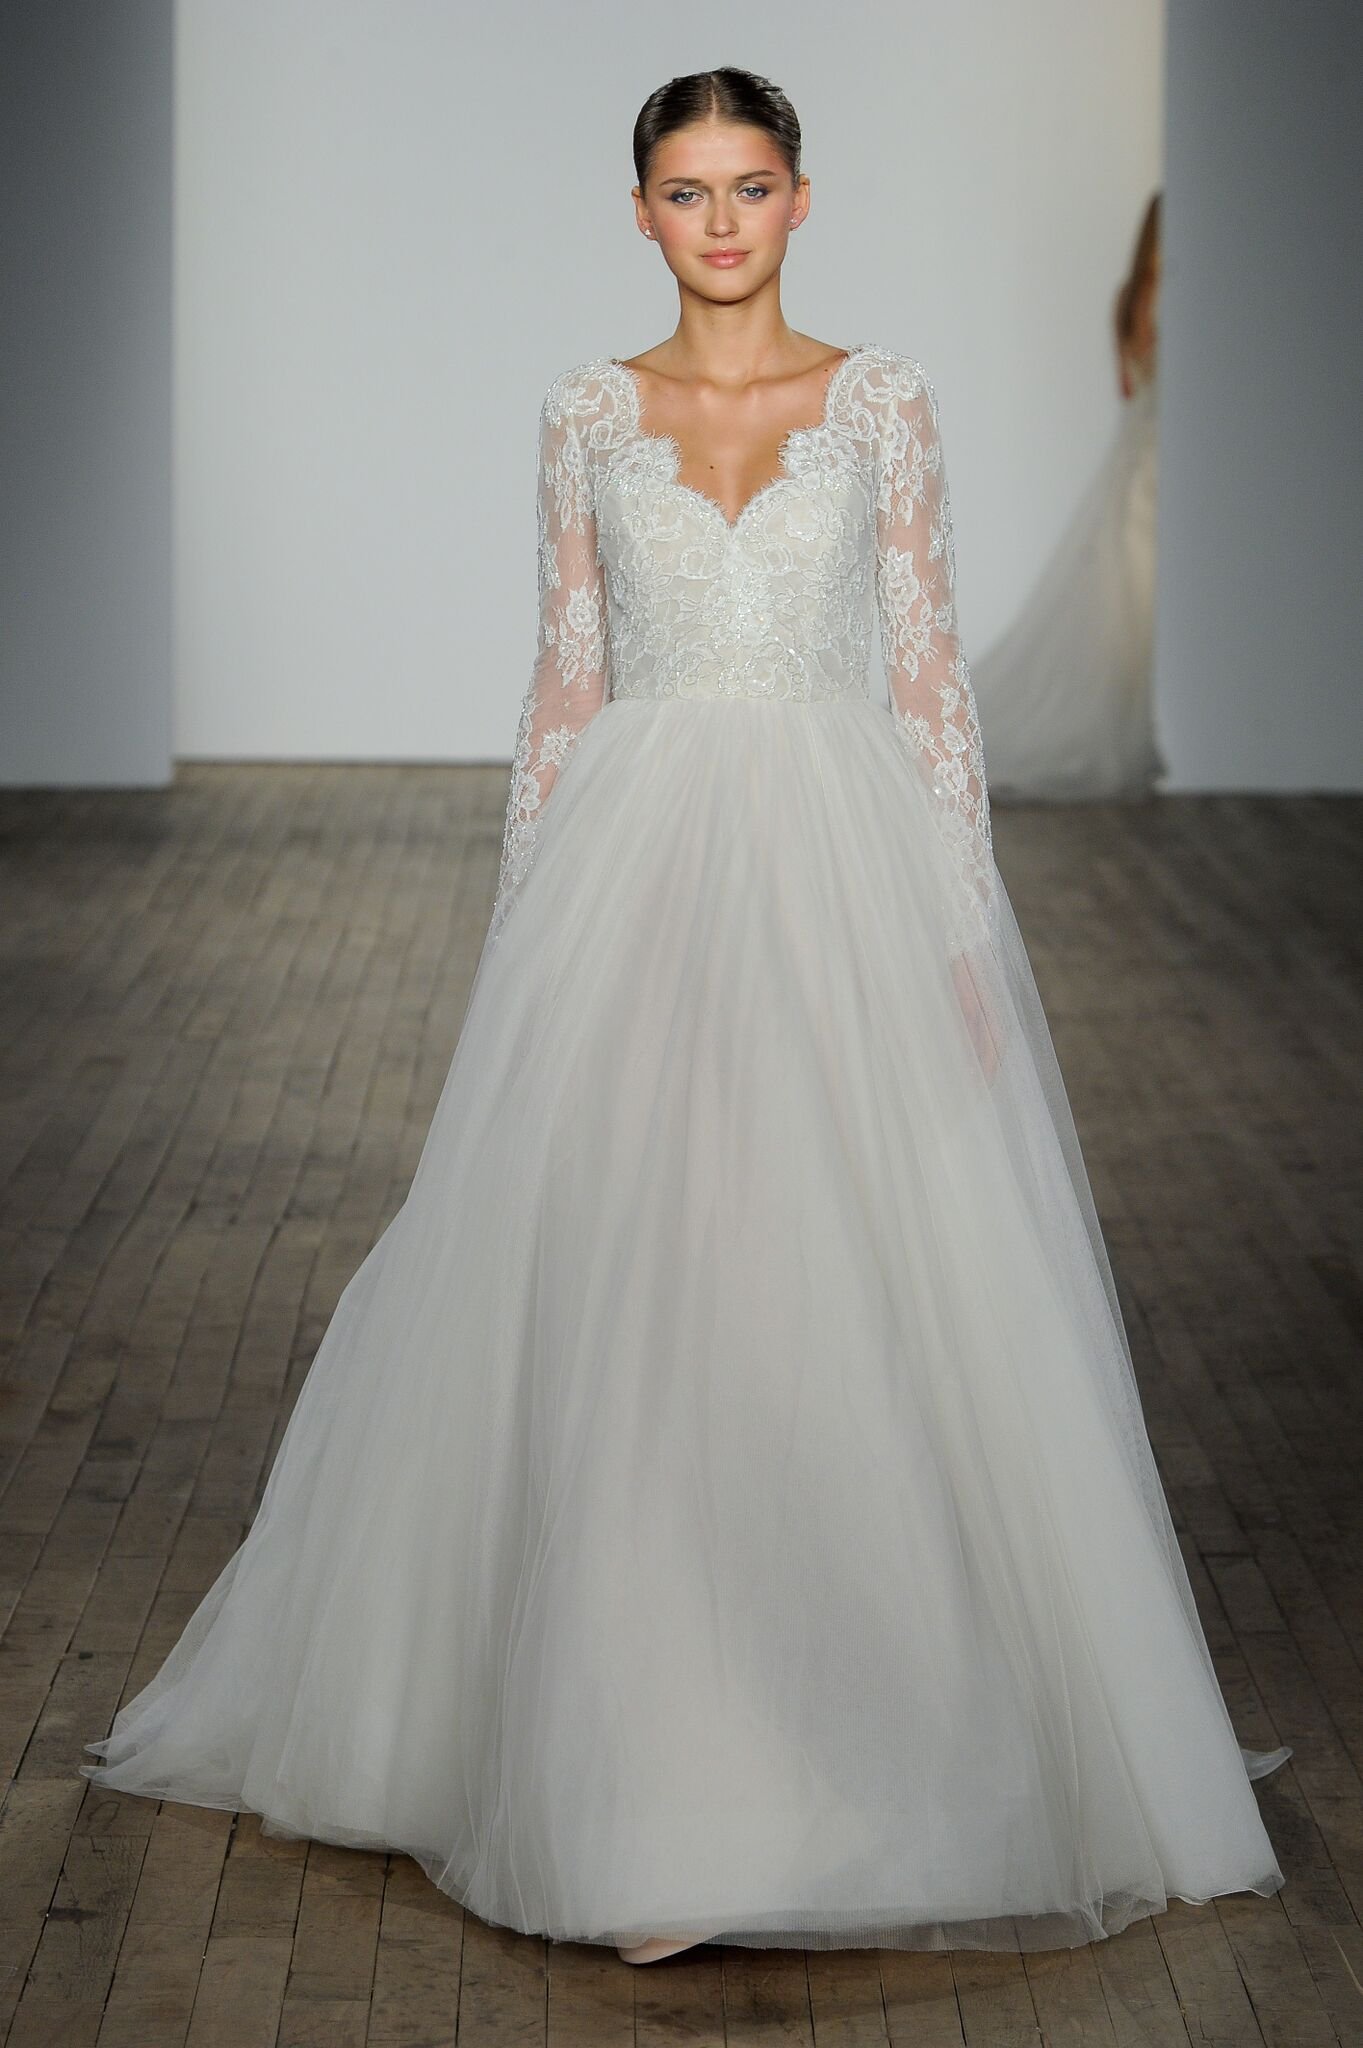  Wedding  Dress  Trends  for Spring 2019  JLM Couture